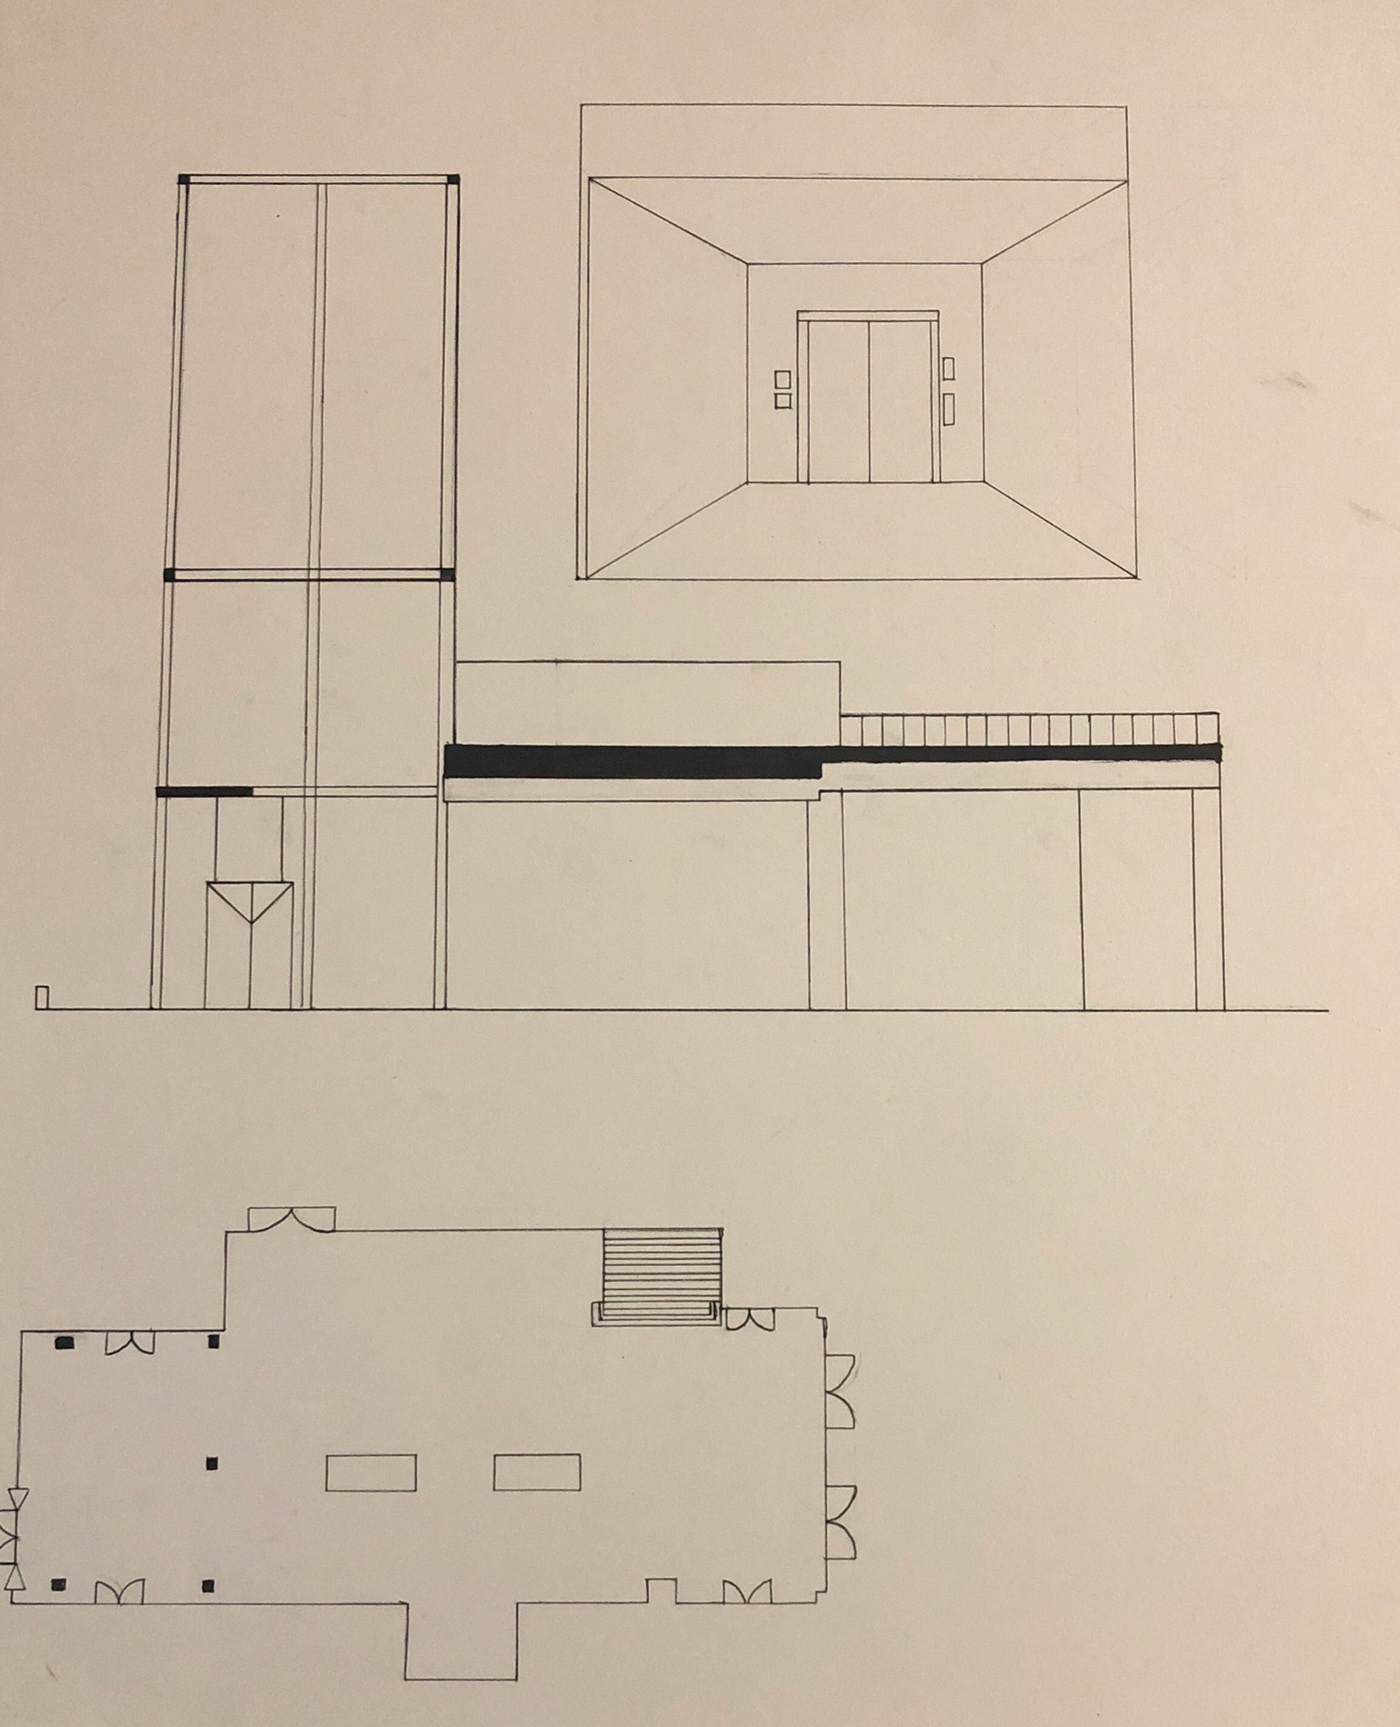 section Plan perspective view